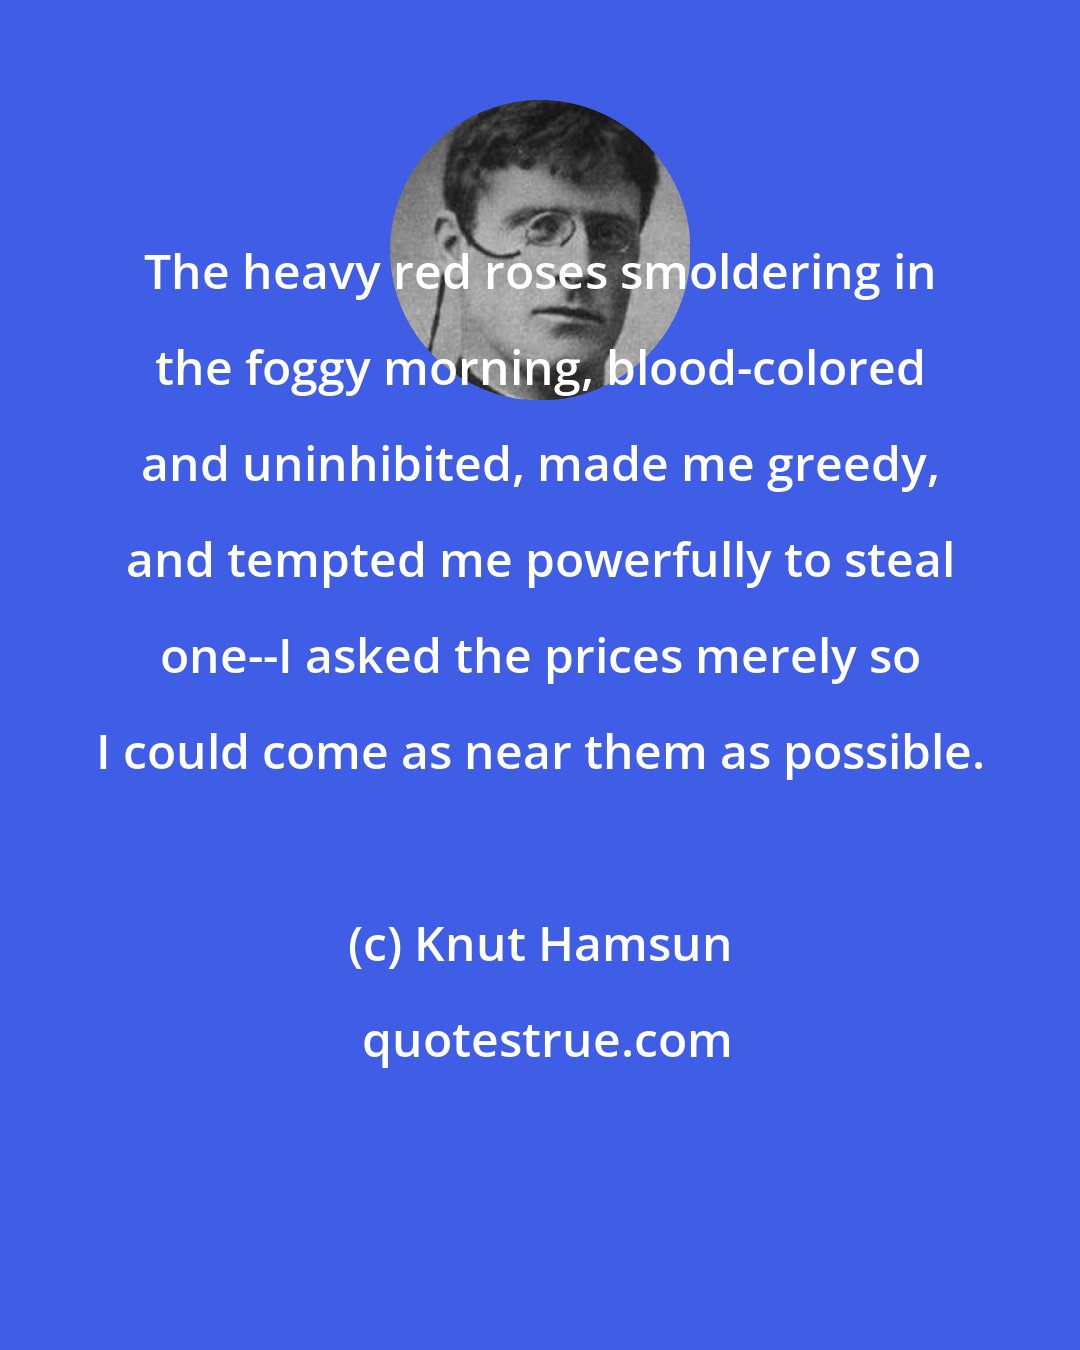 Knut Hamsun: The heavy red roses smoldering in the foggy morning, blood-colored and uninhibited, made me greedy, and tempted me powerfully to steal one--I asked the prices merely so I could come as near them as possible.